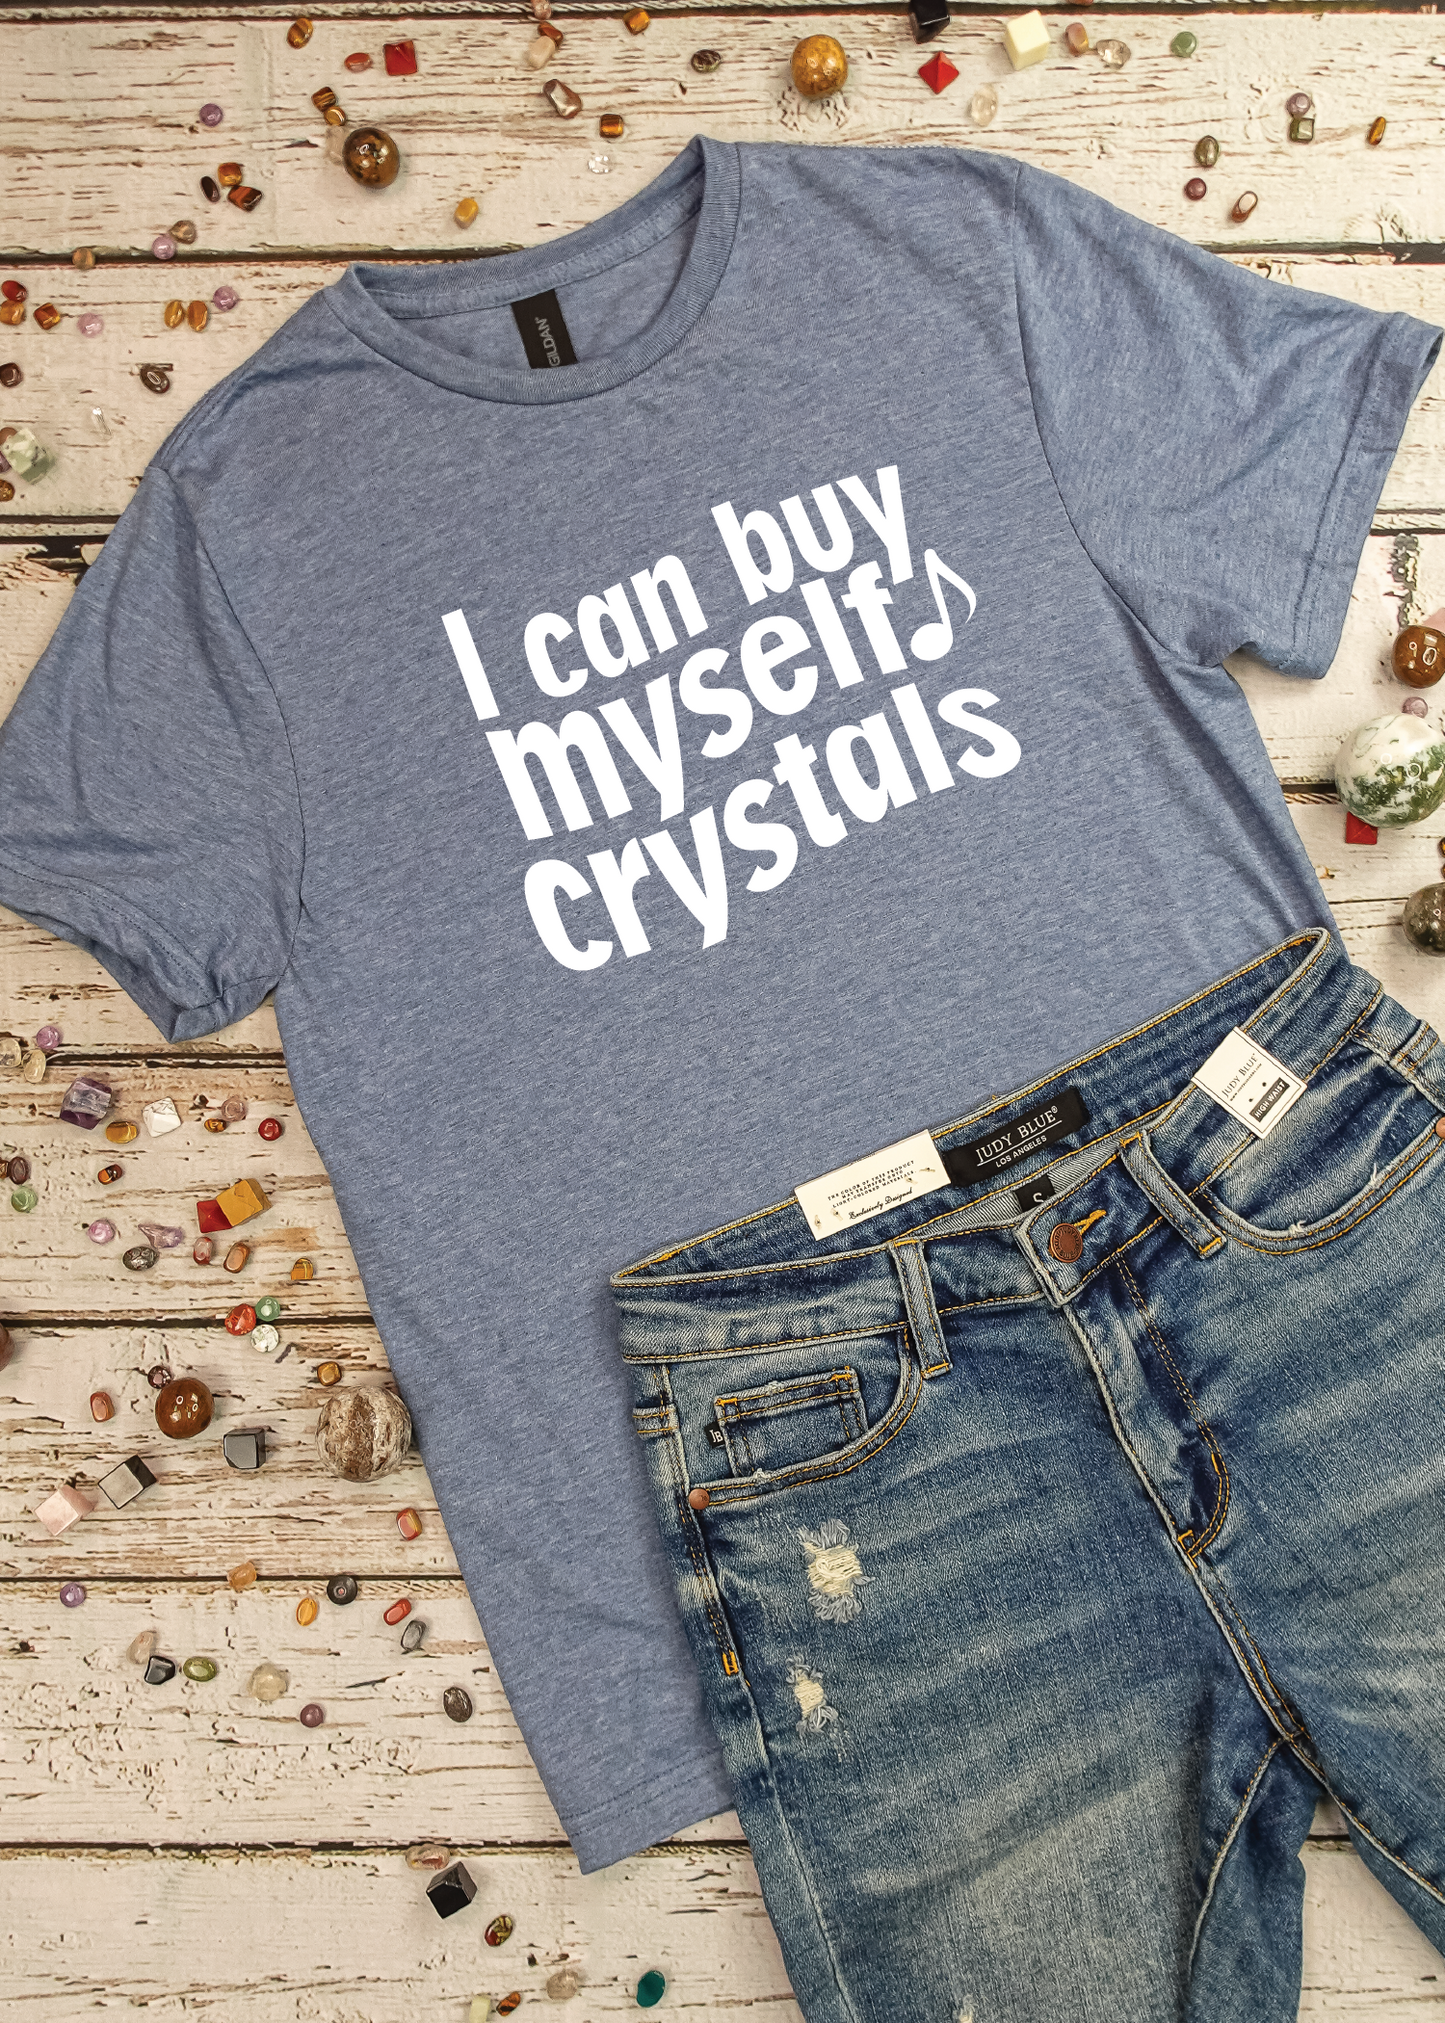 I can Buy Myself Crystals - Graphic Tee